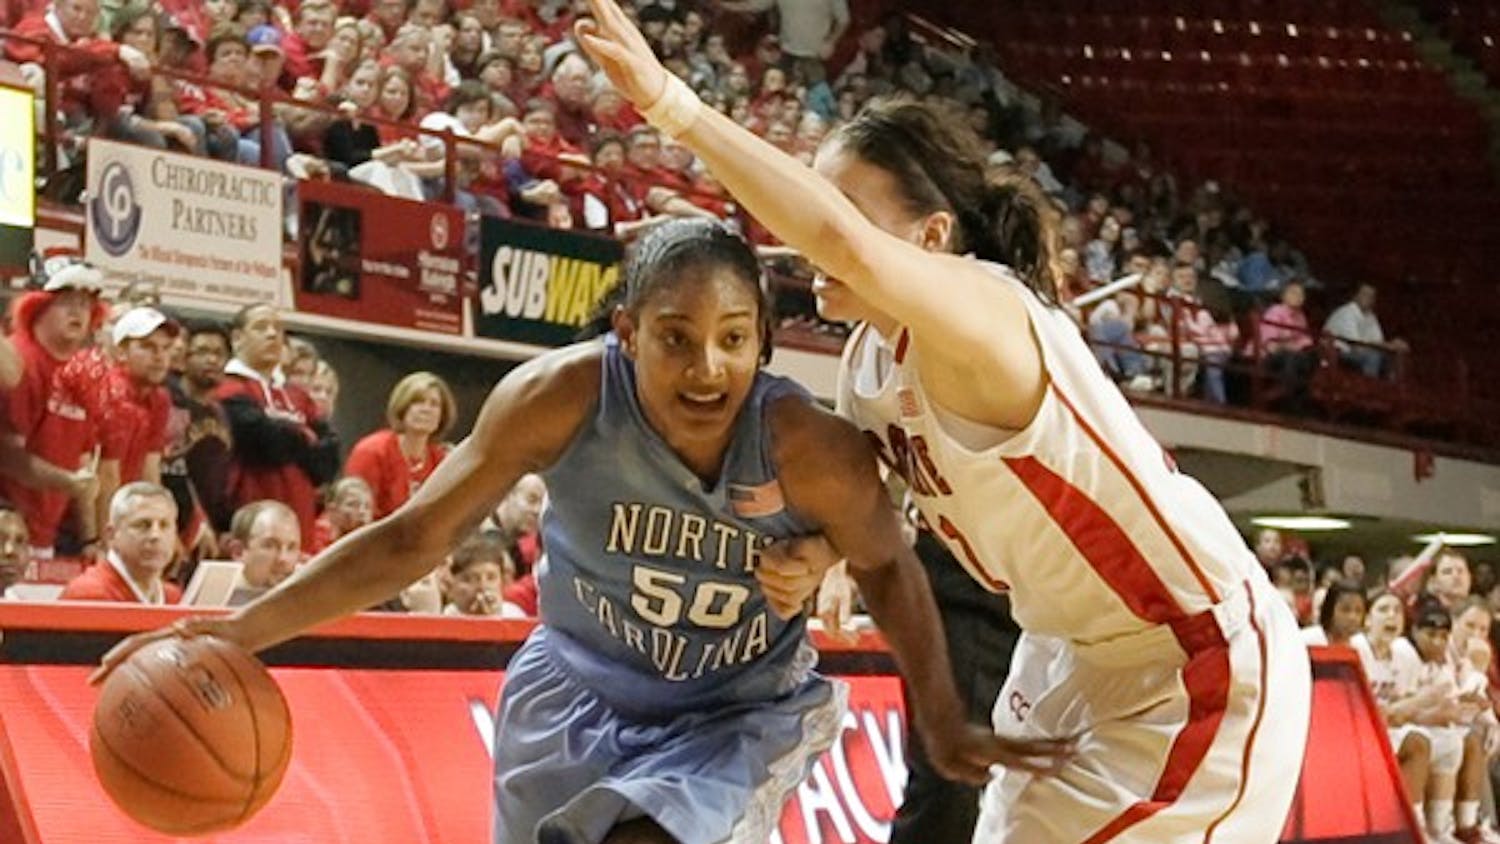 Italee Lucas made up for a poor first half with 28 second-half points to lead North Carolina to victory. DTH/Phong Dinh